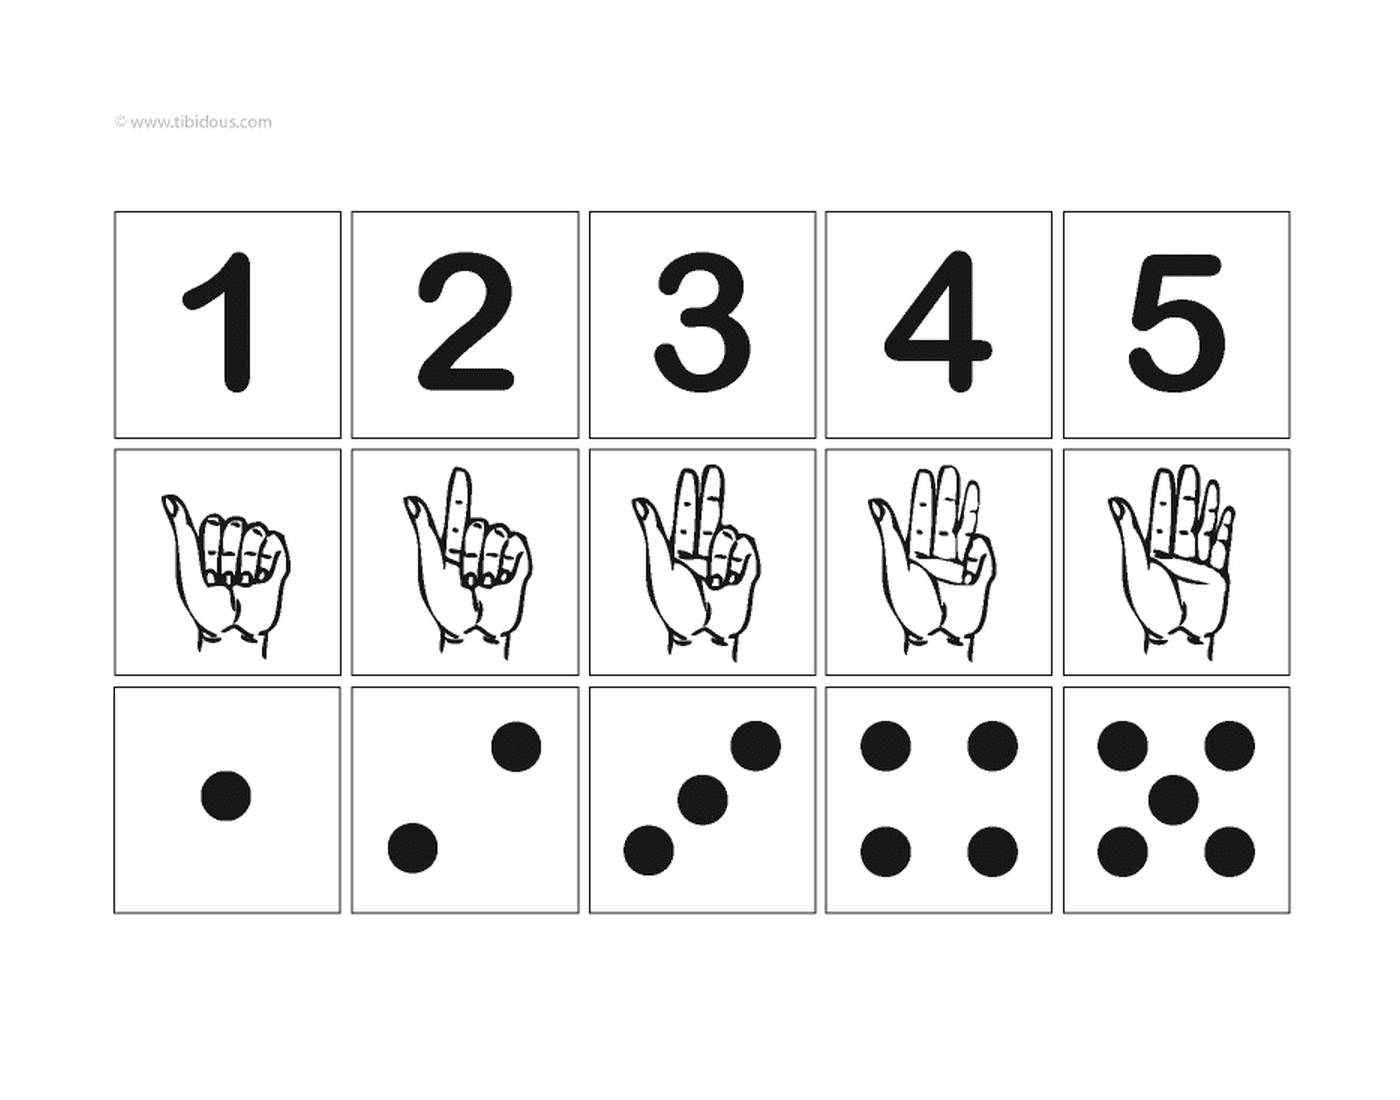  Numbers from one to five with sign and illustration 